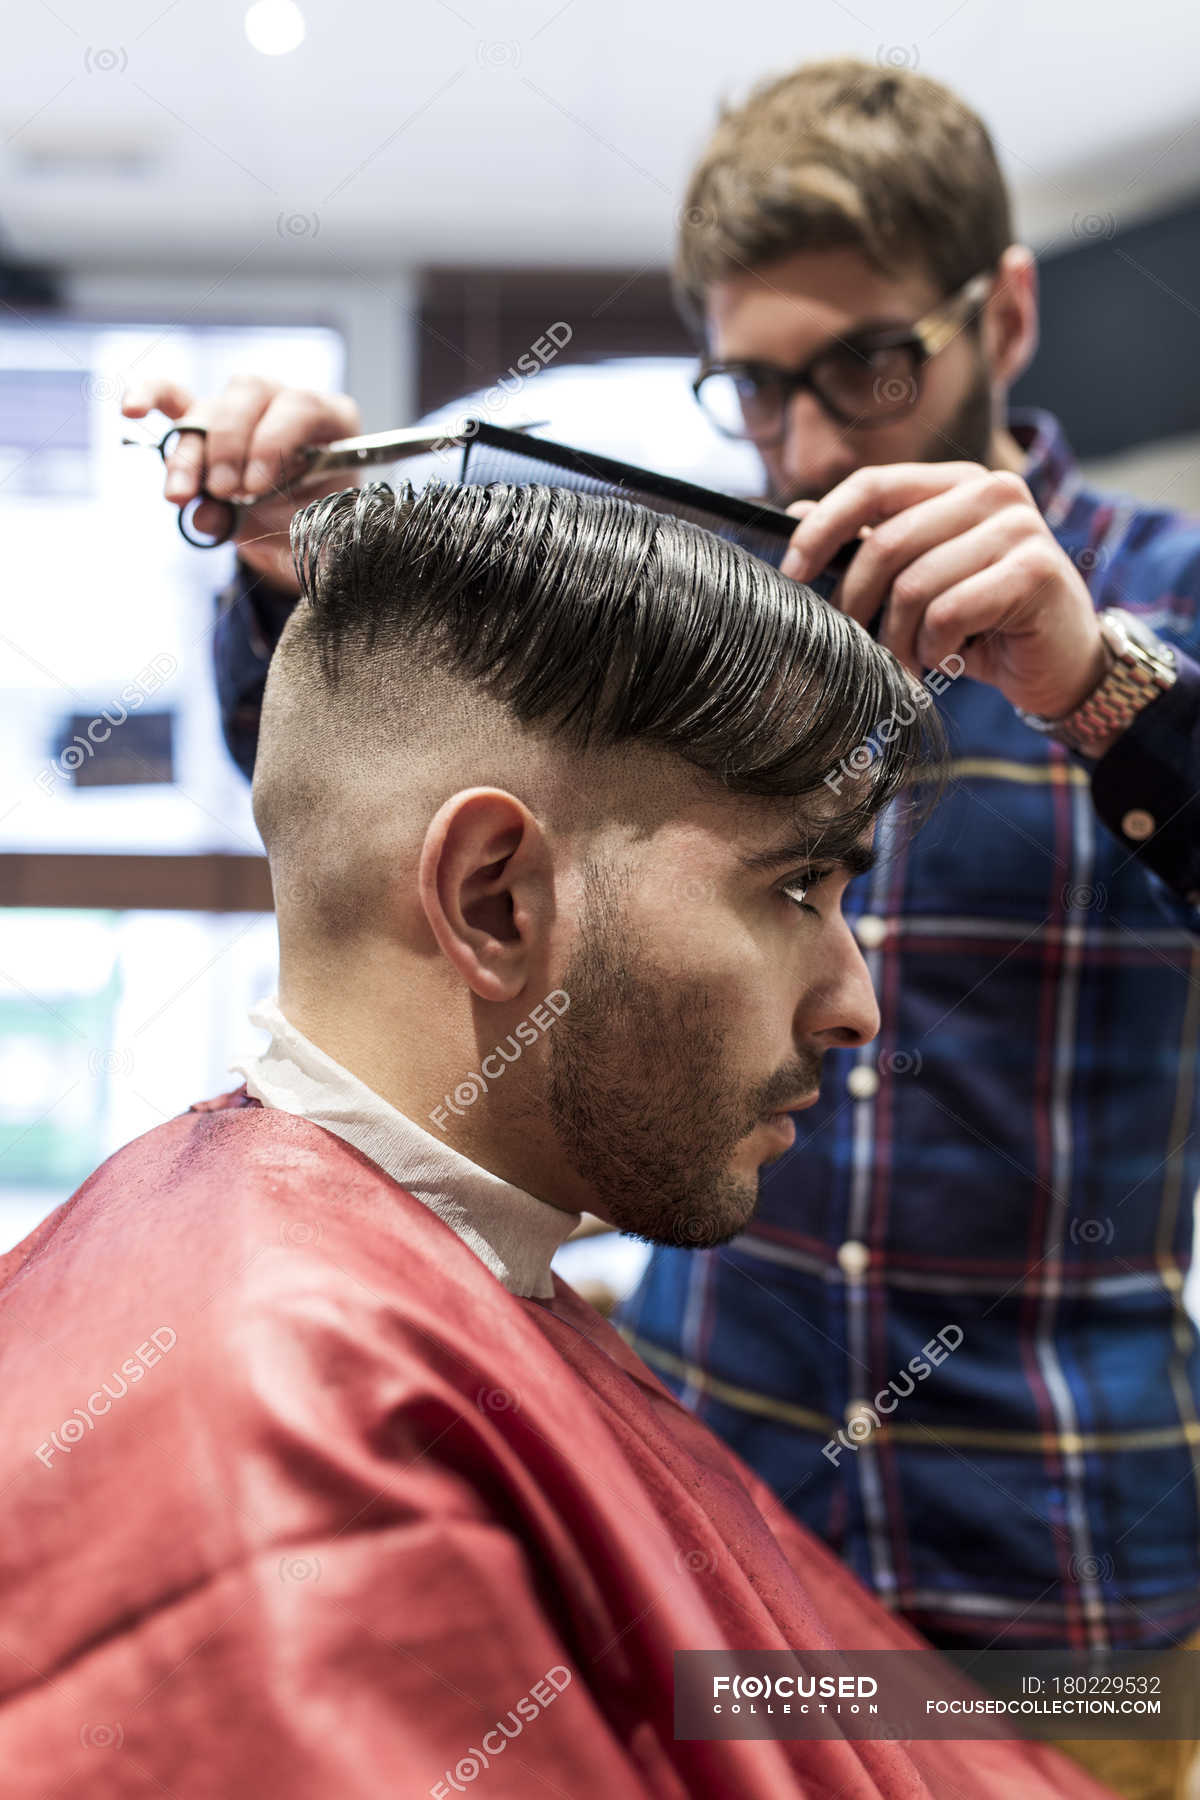 Hairdresser cutting young man's hair in a barbershop — hair salon, scissors  - Stock Photo | #180229532